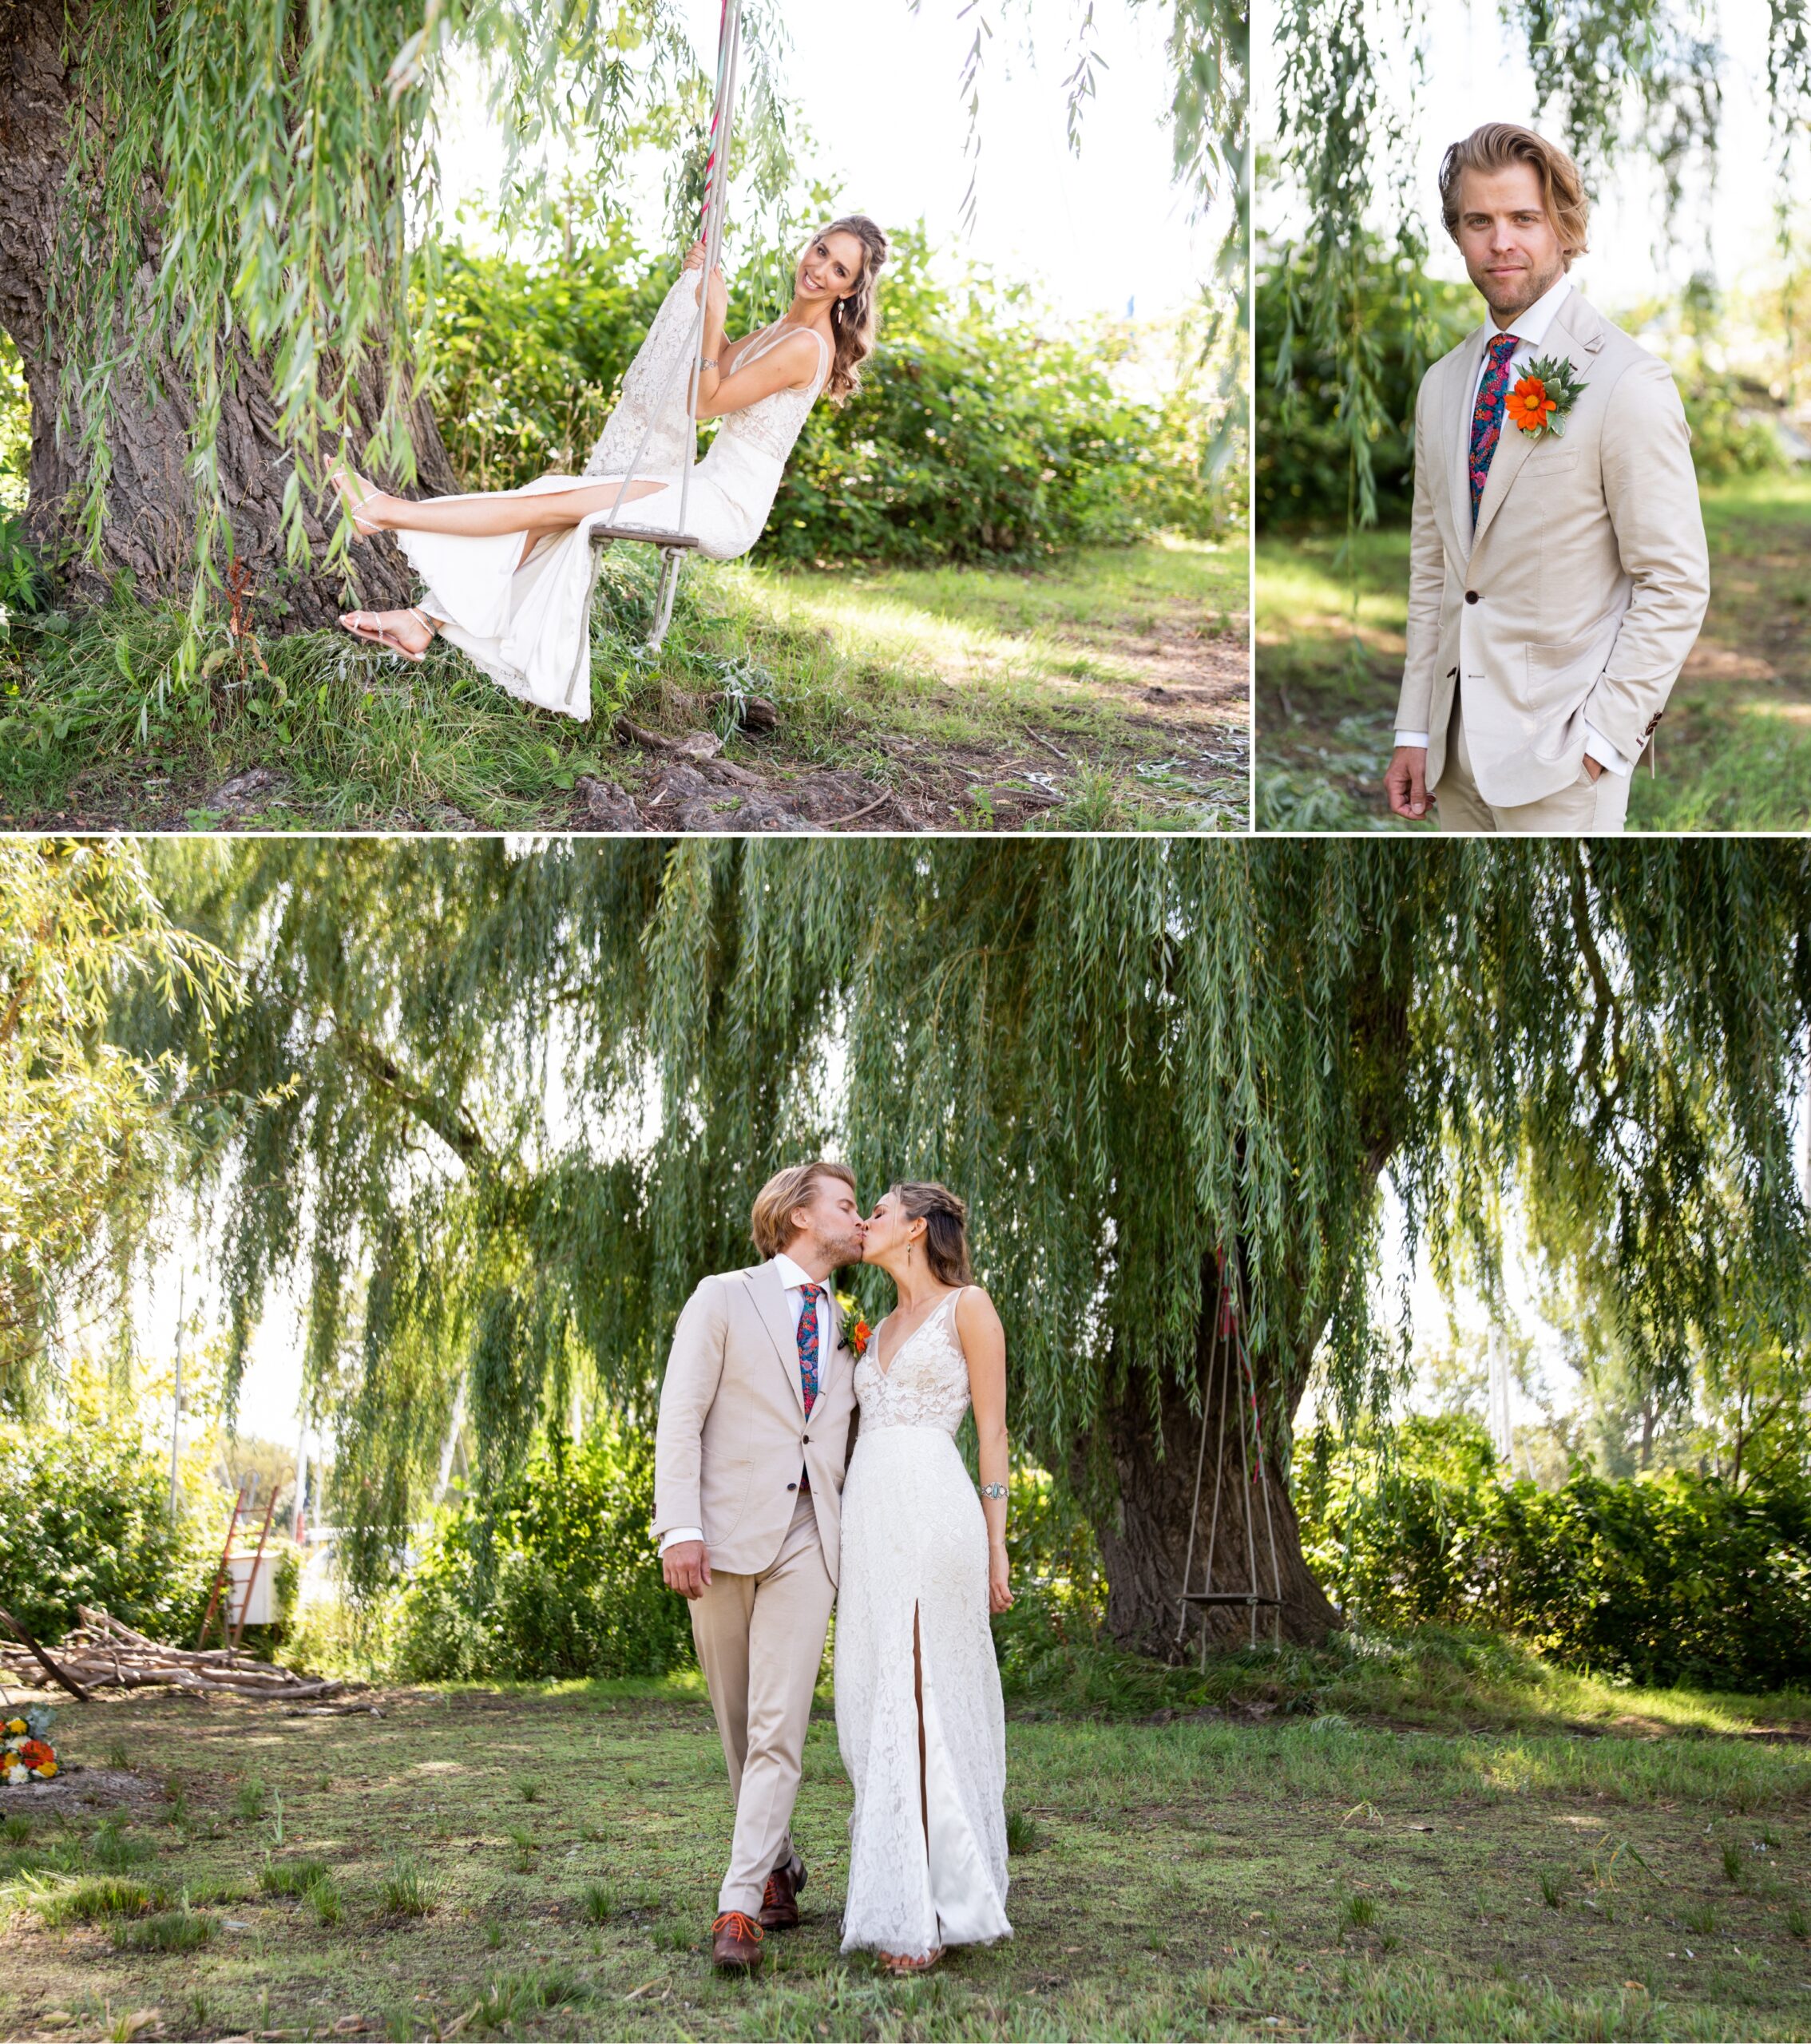 Portraits in nature in front of willow tree